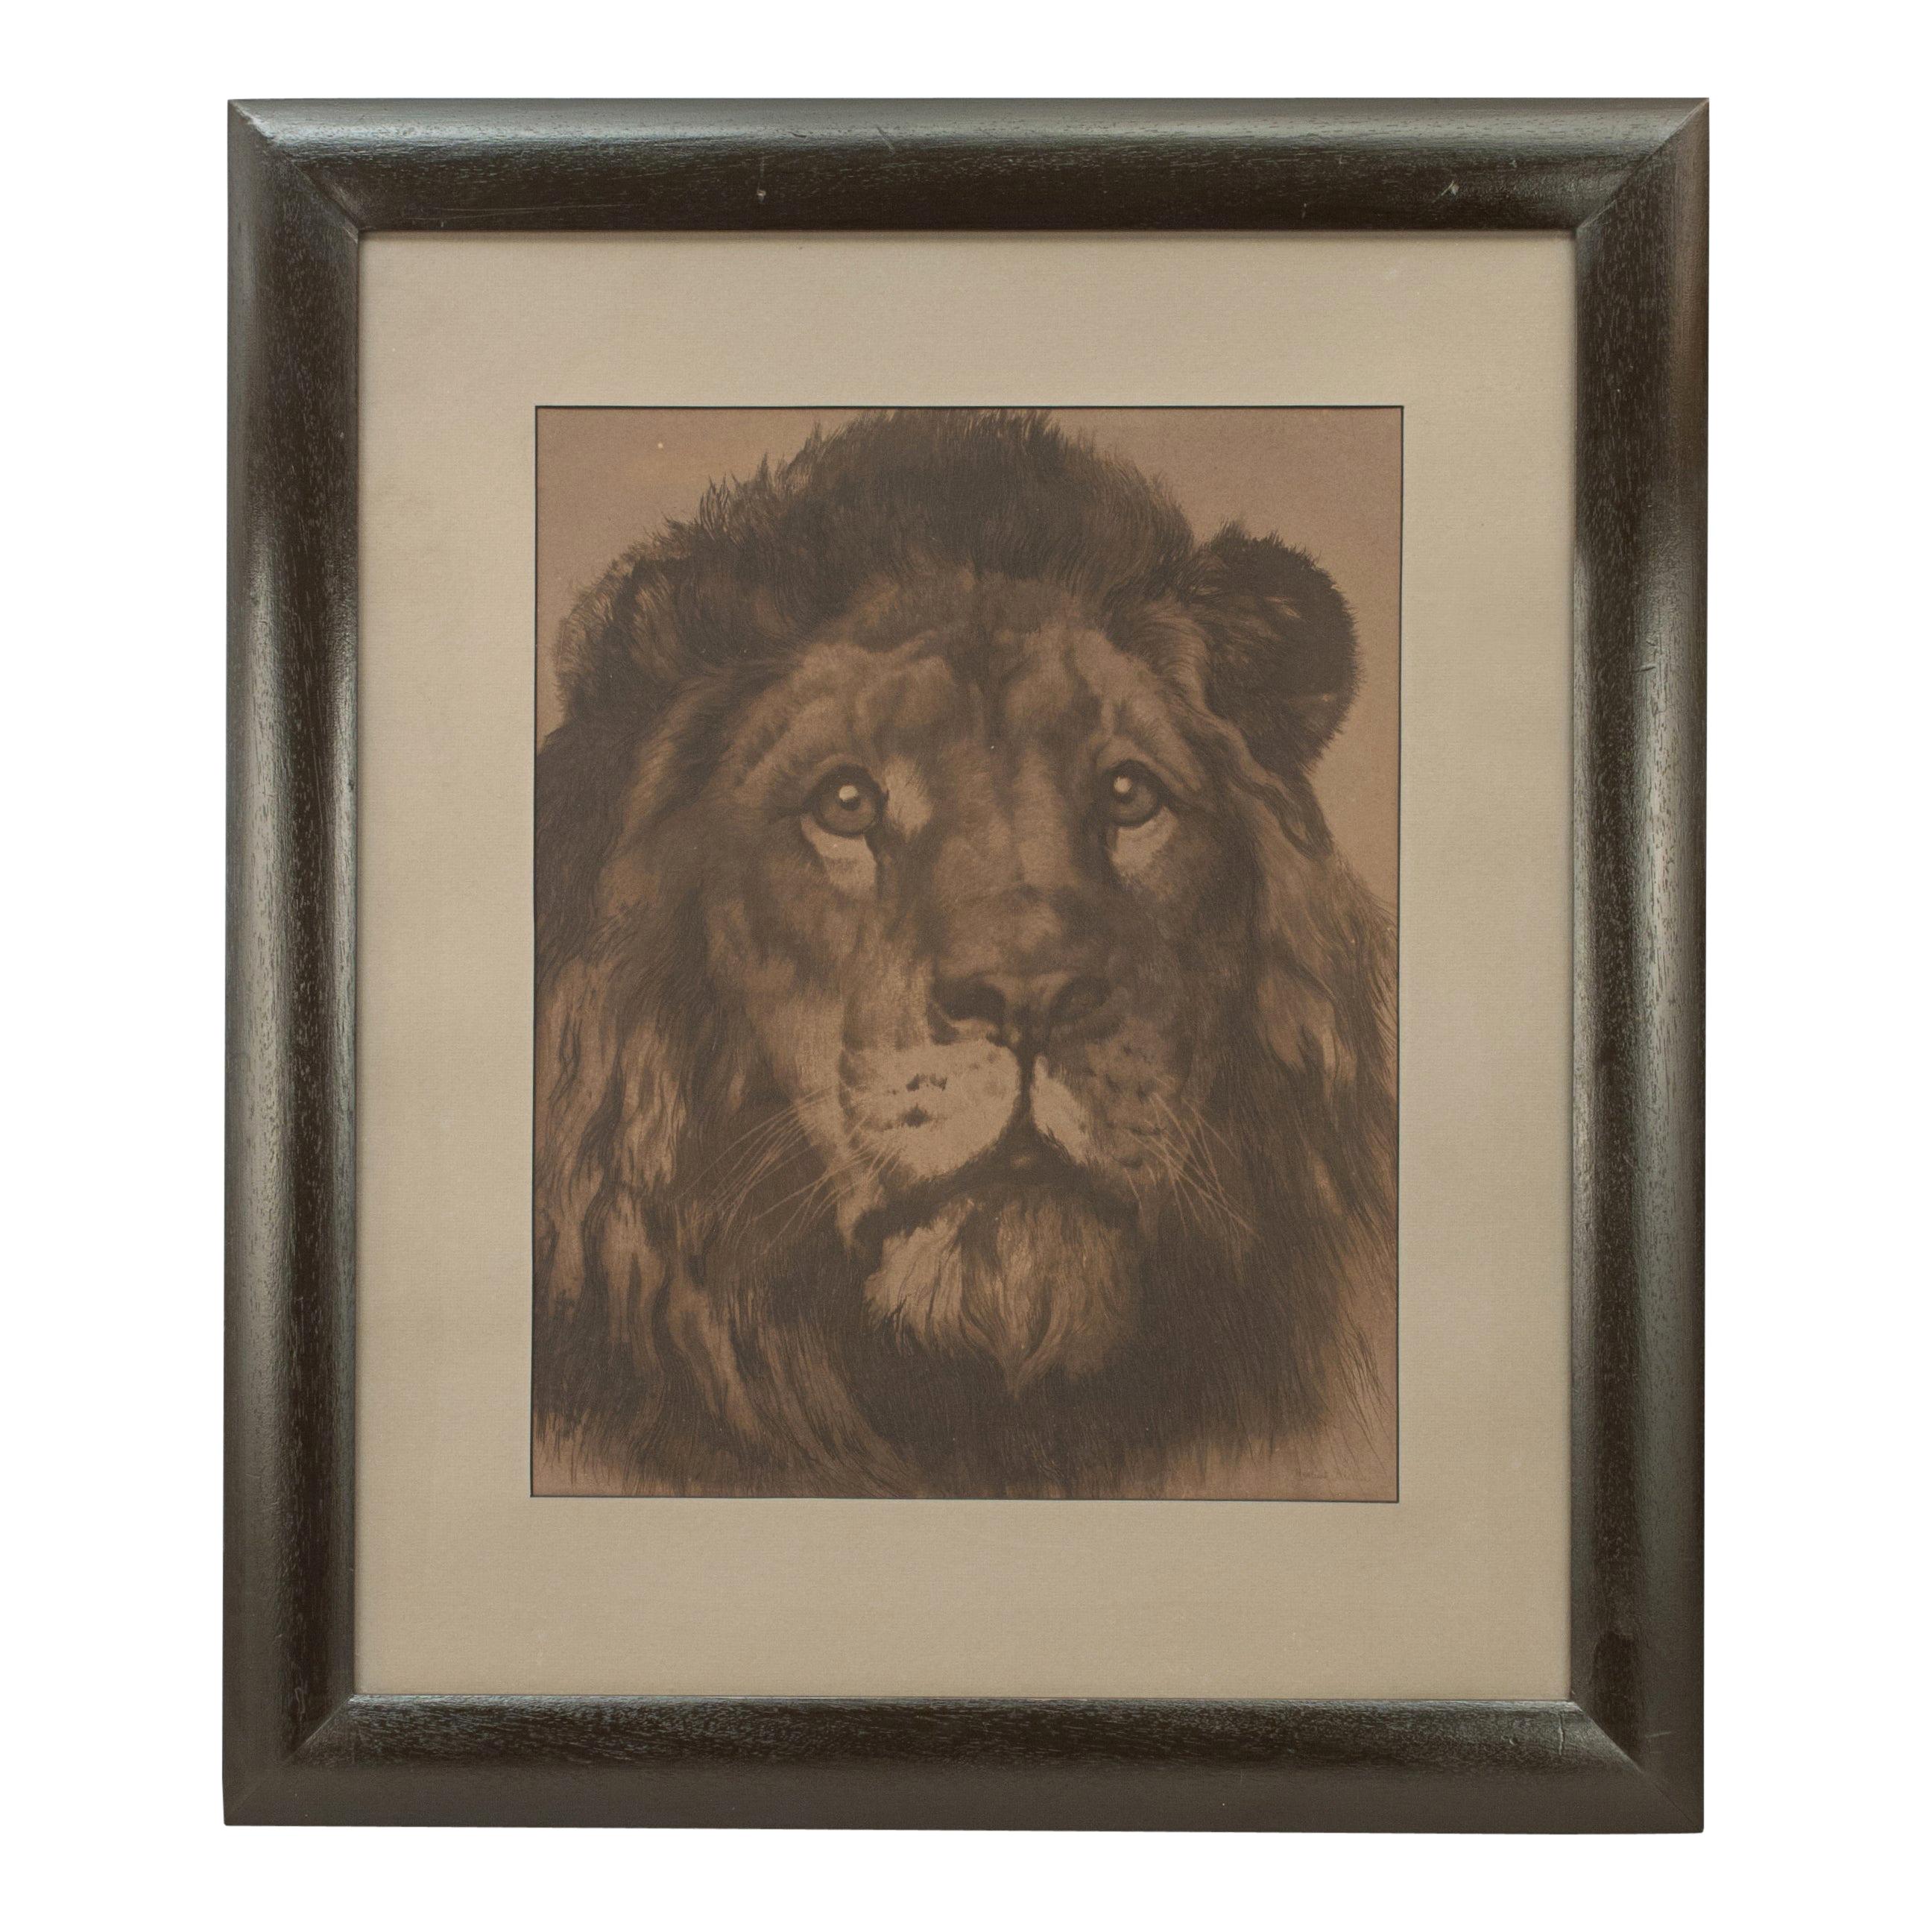 'His Majesty', Lion Portrait by Herbert Dicksee